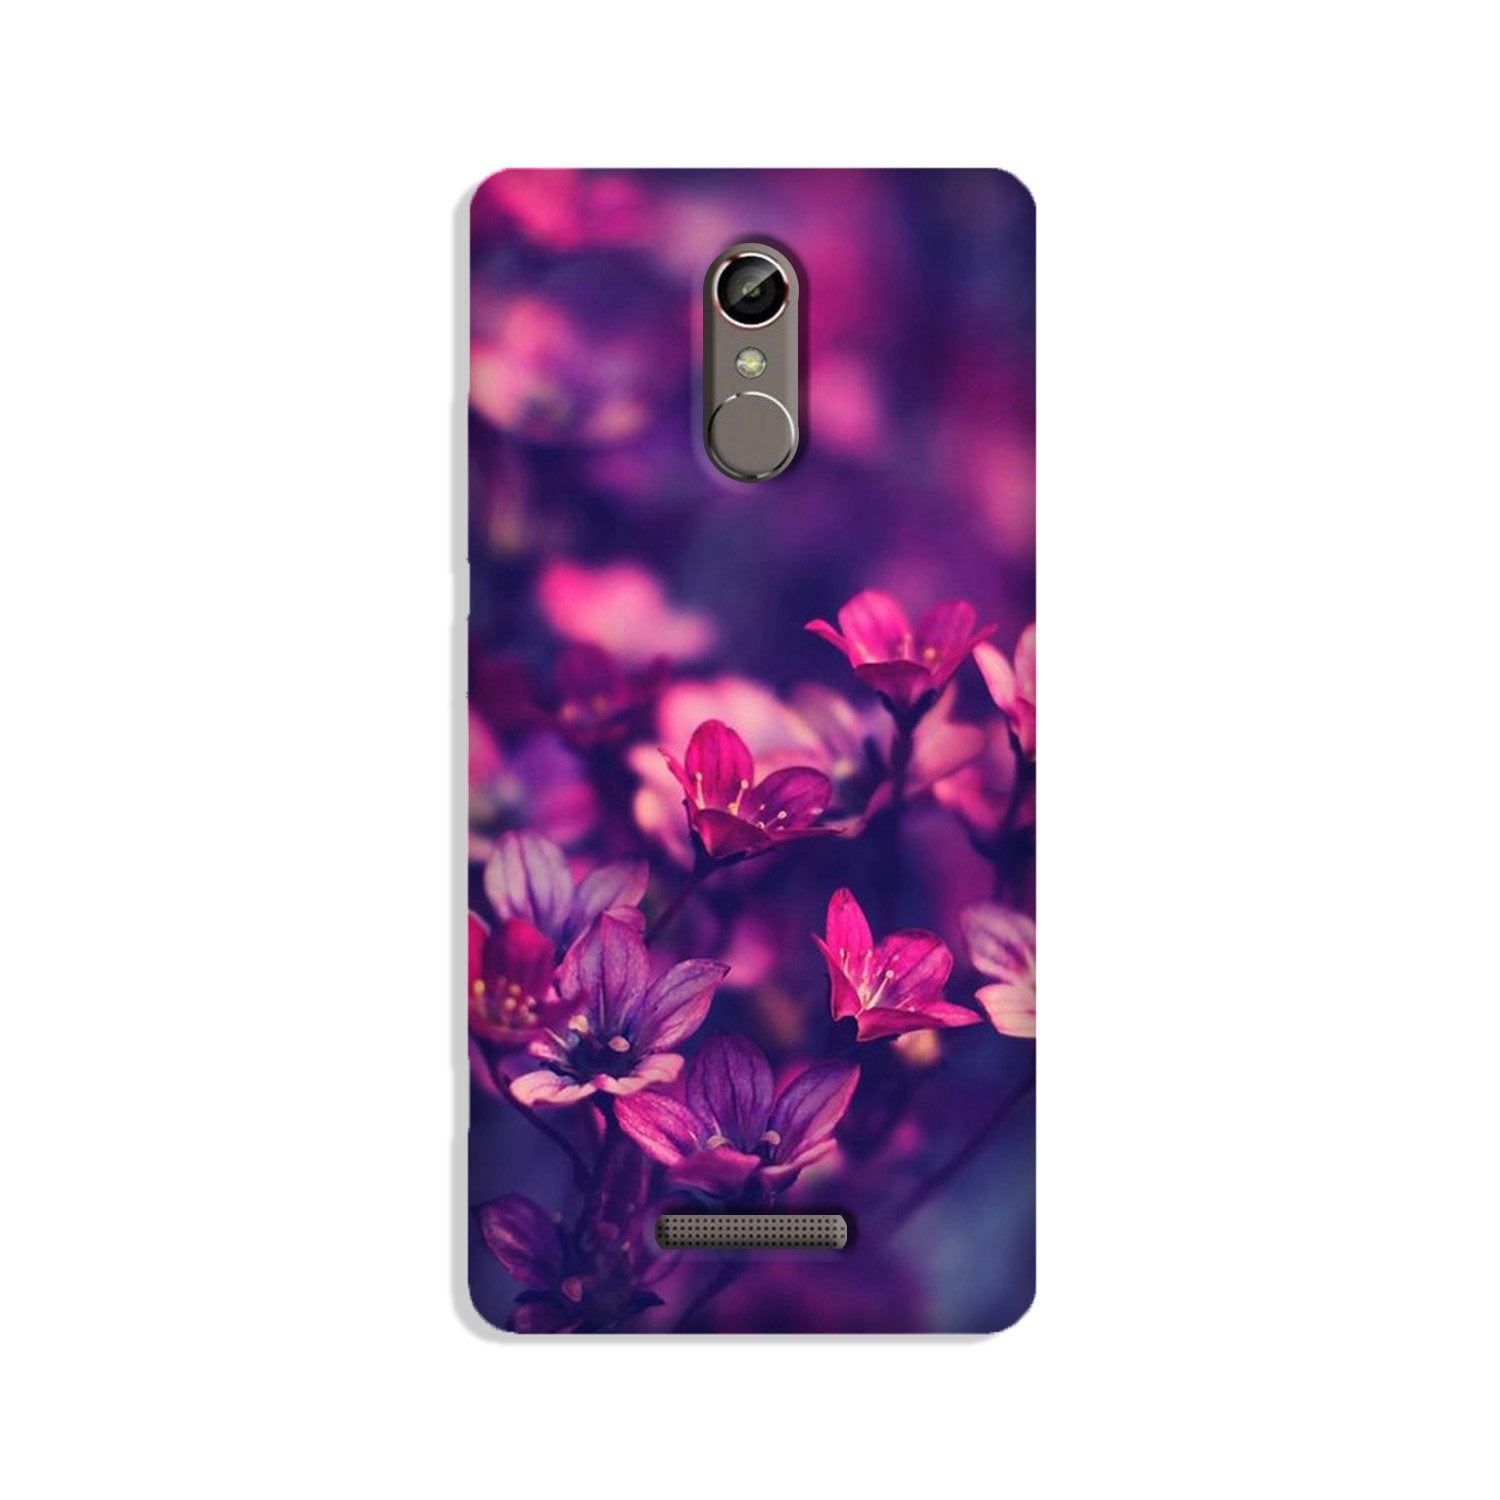 flowers Case for Redmi Note 3